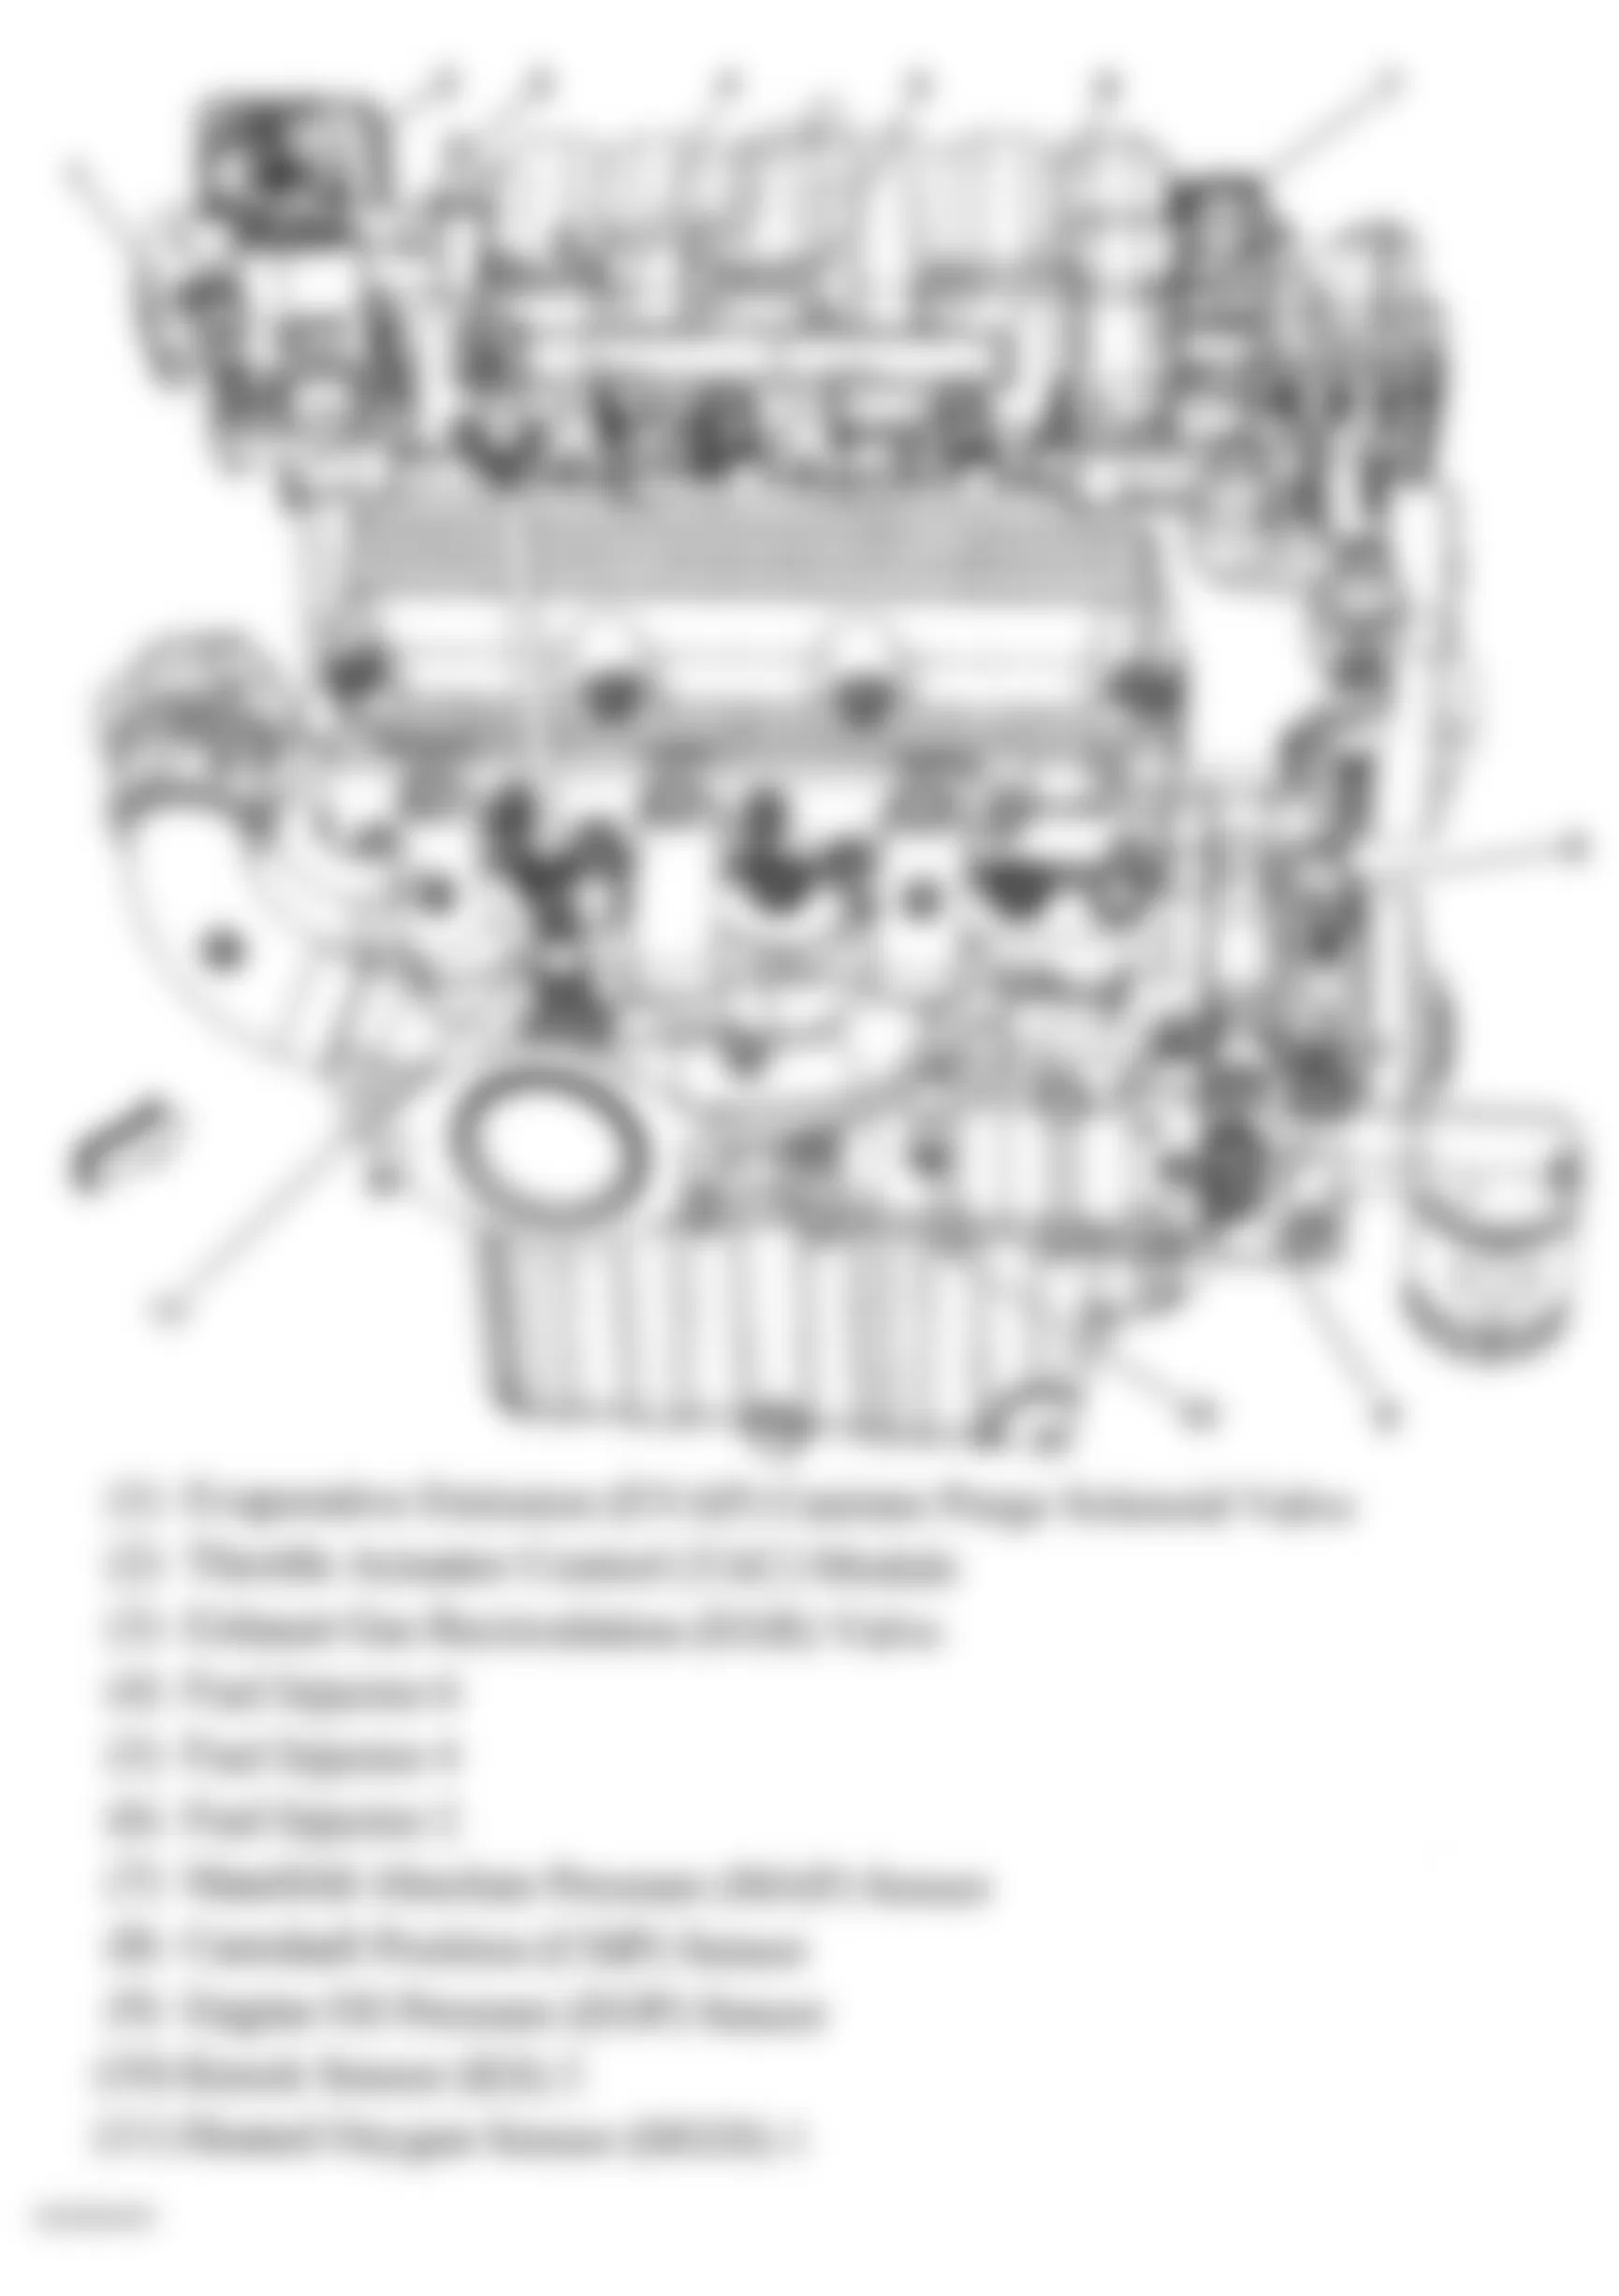 Buick LaCrosse CXS 2005 - Component Locations -  Right Side Of Engine (3.8L)